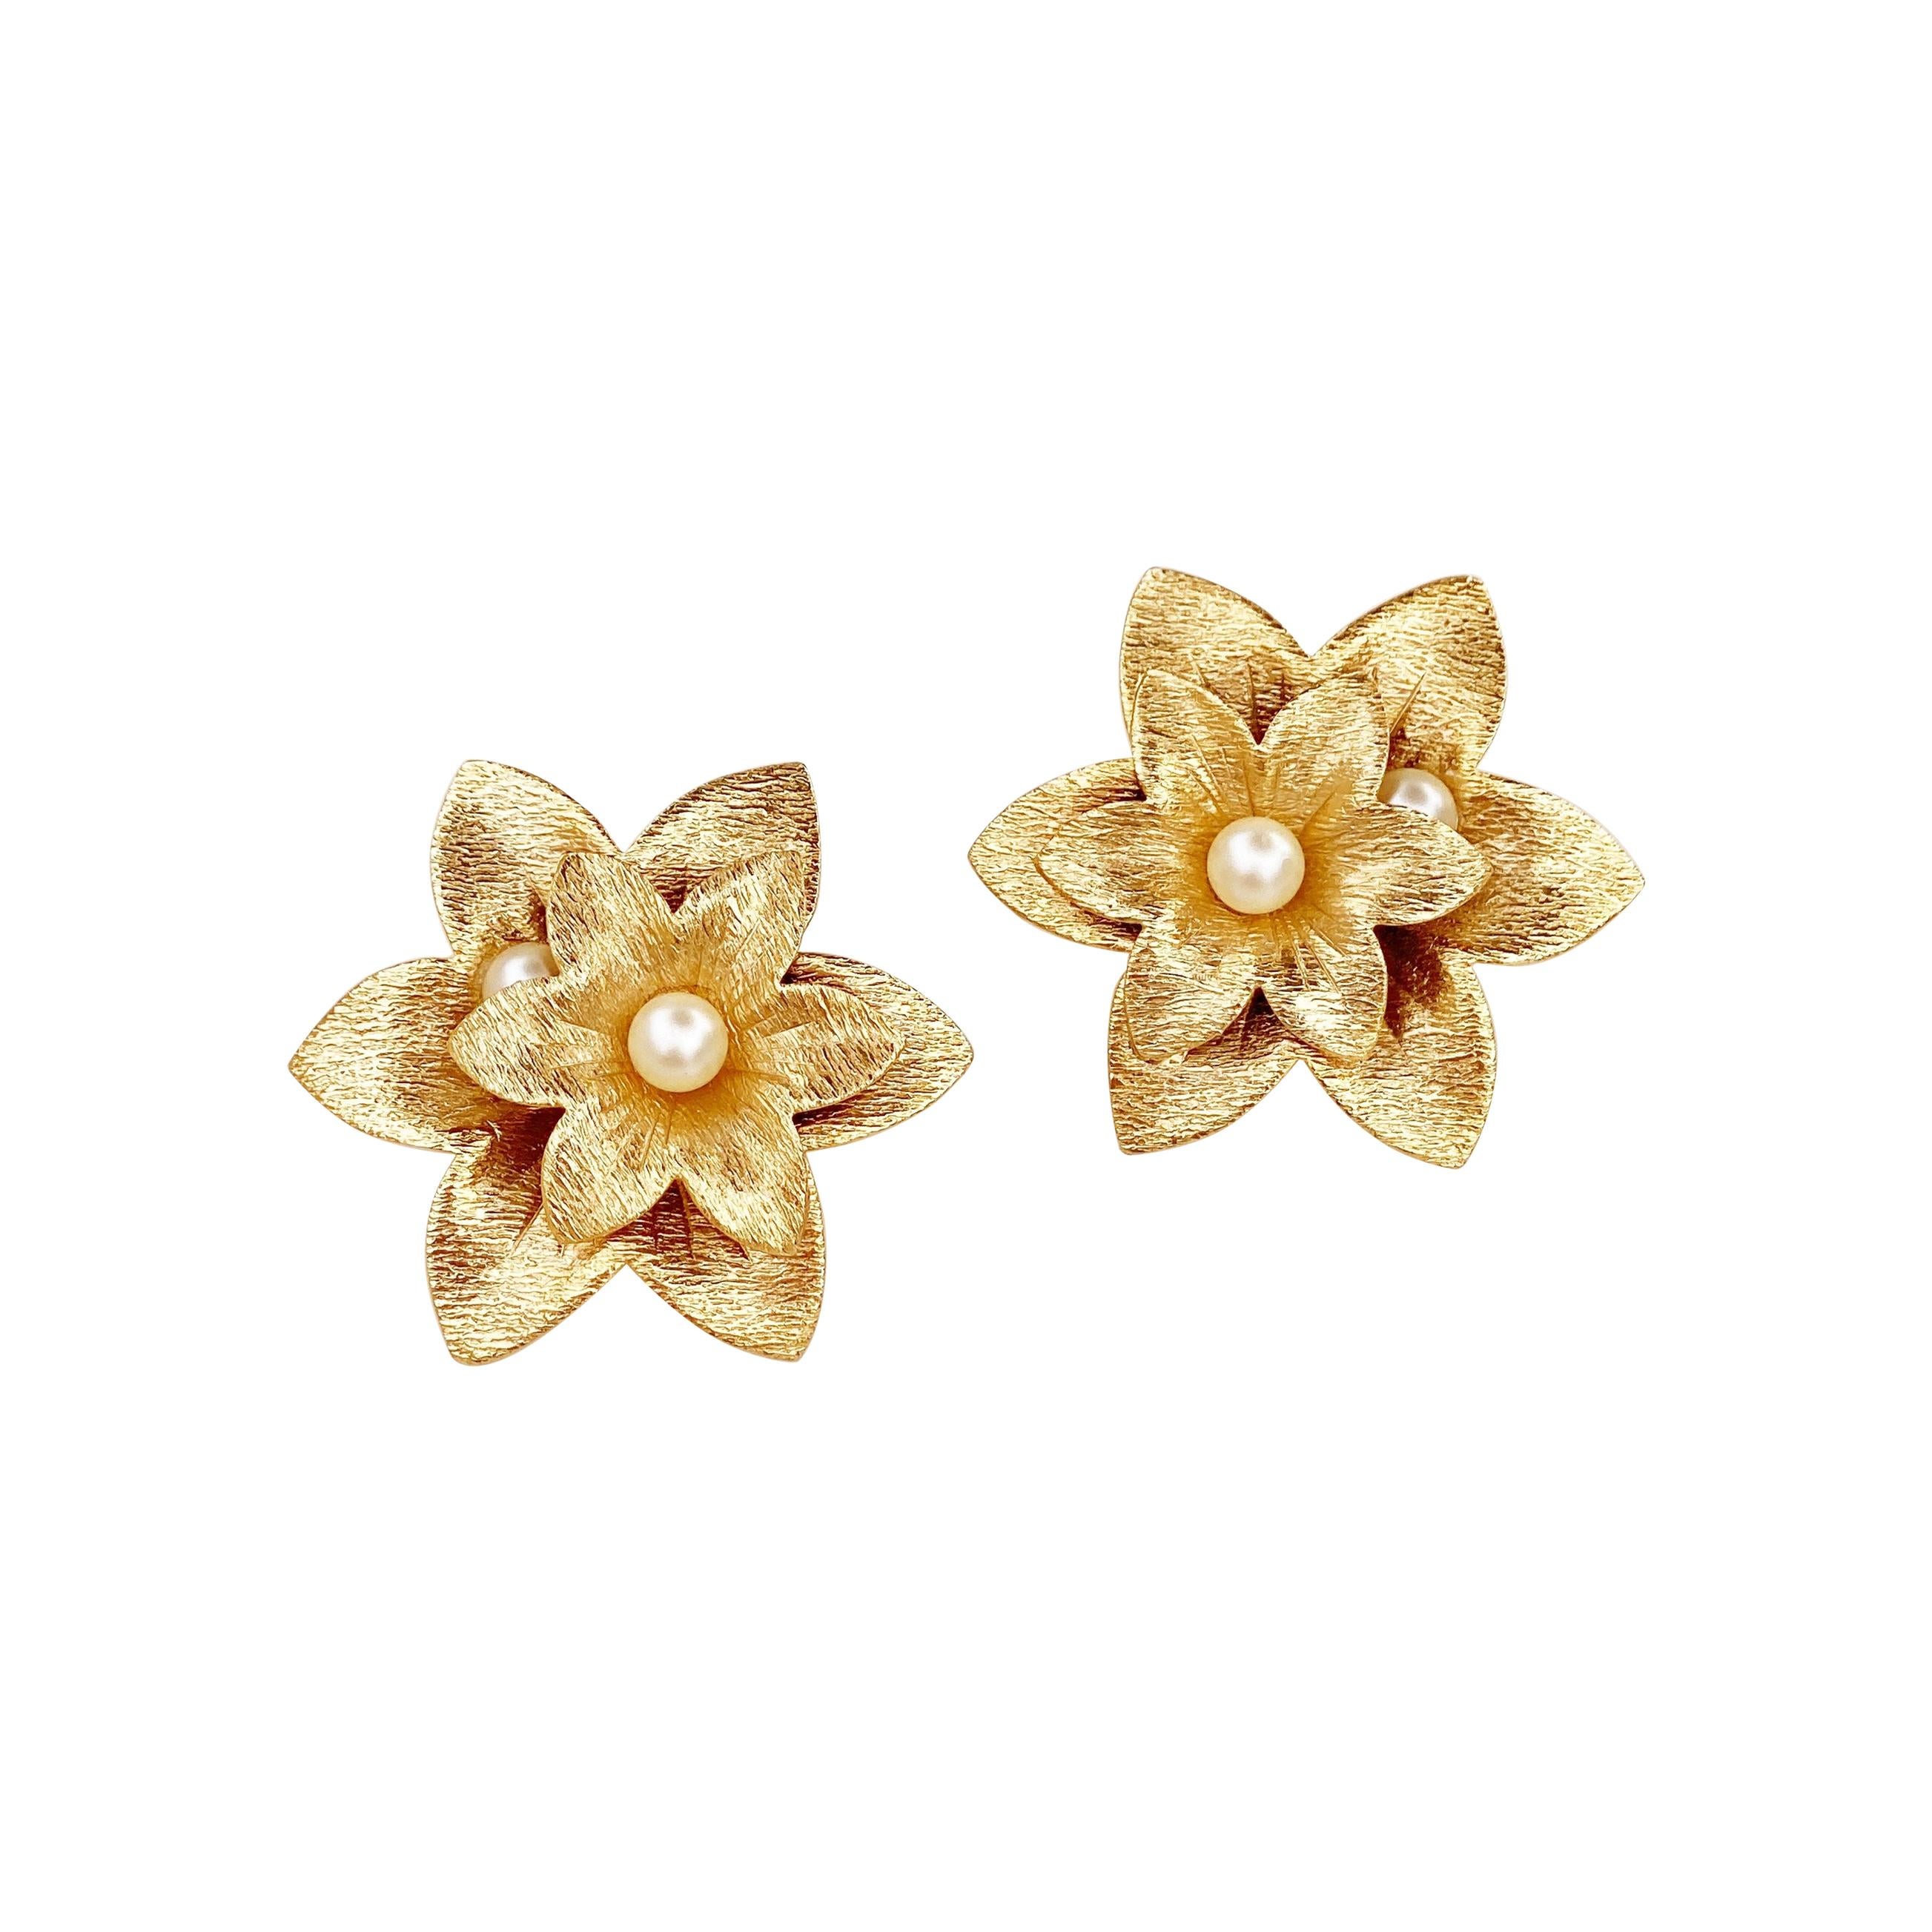 Oversized Textured Gold Flower Earrings By Sarah Coventry, 1970s For Sale